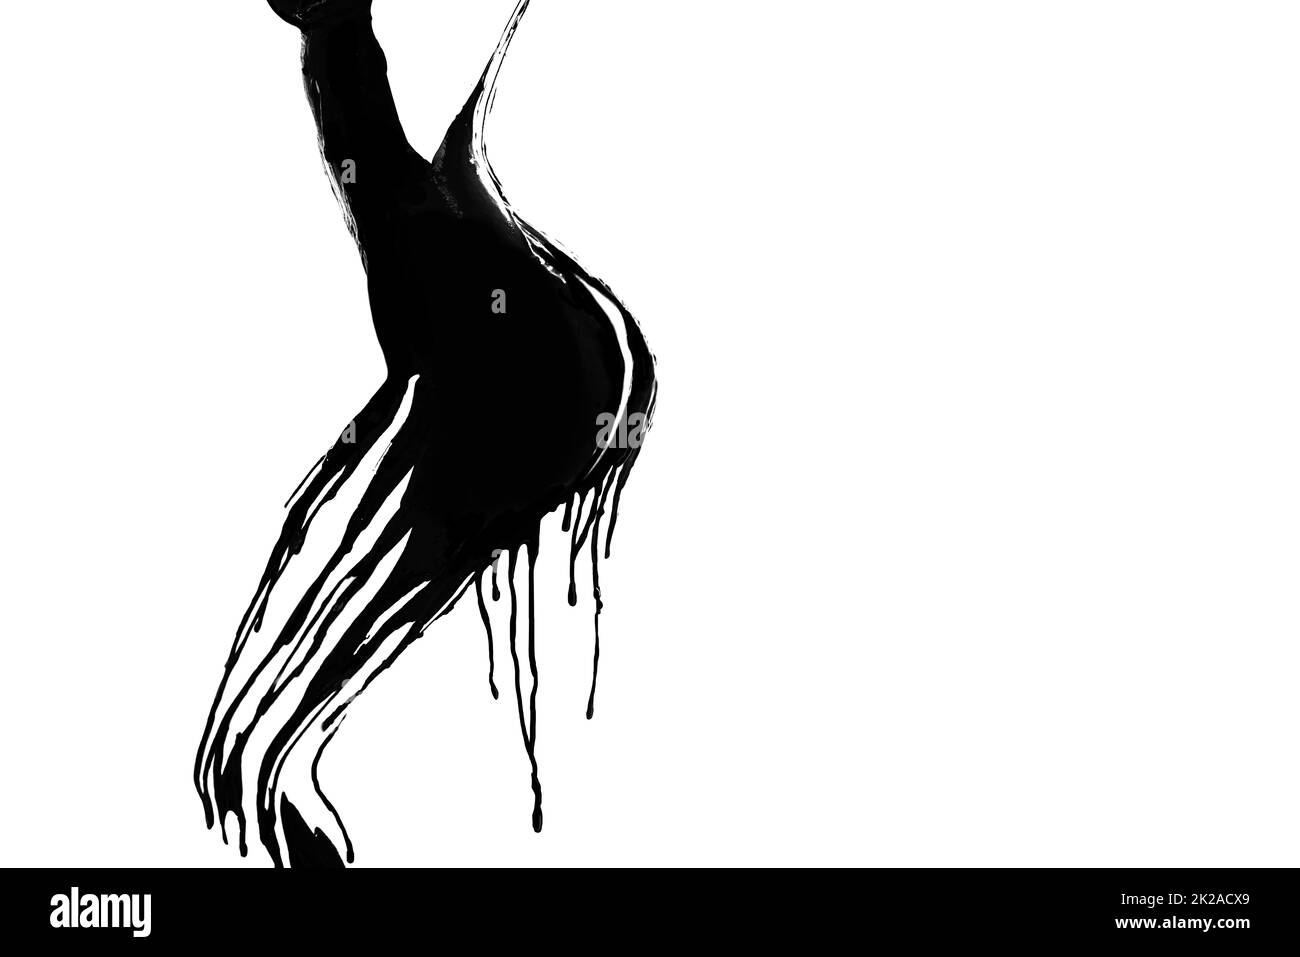 Shake it off. Black paint outlining a womans body. Stock Photo